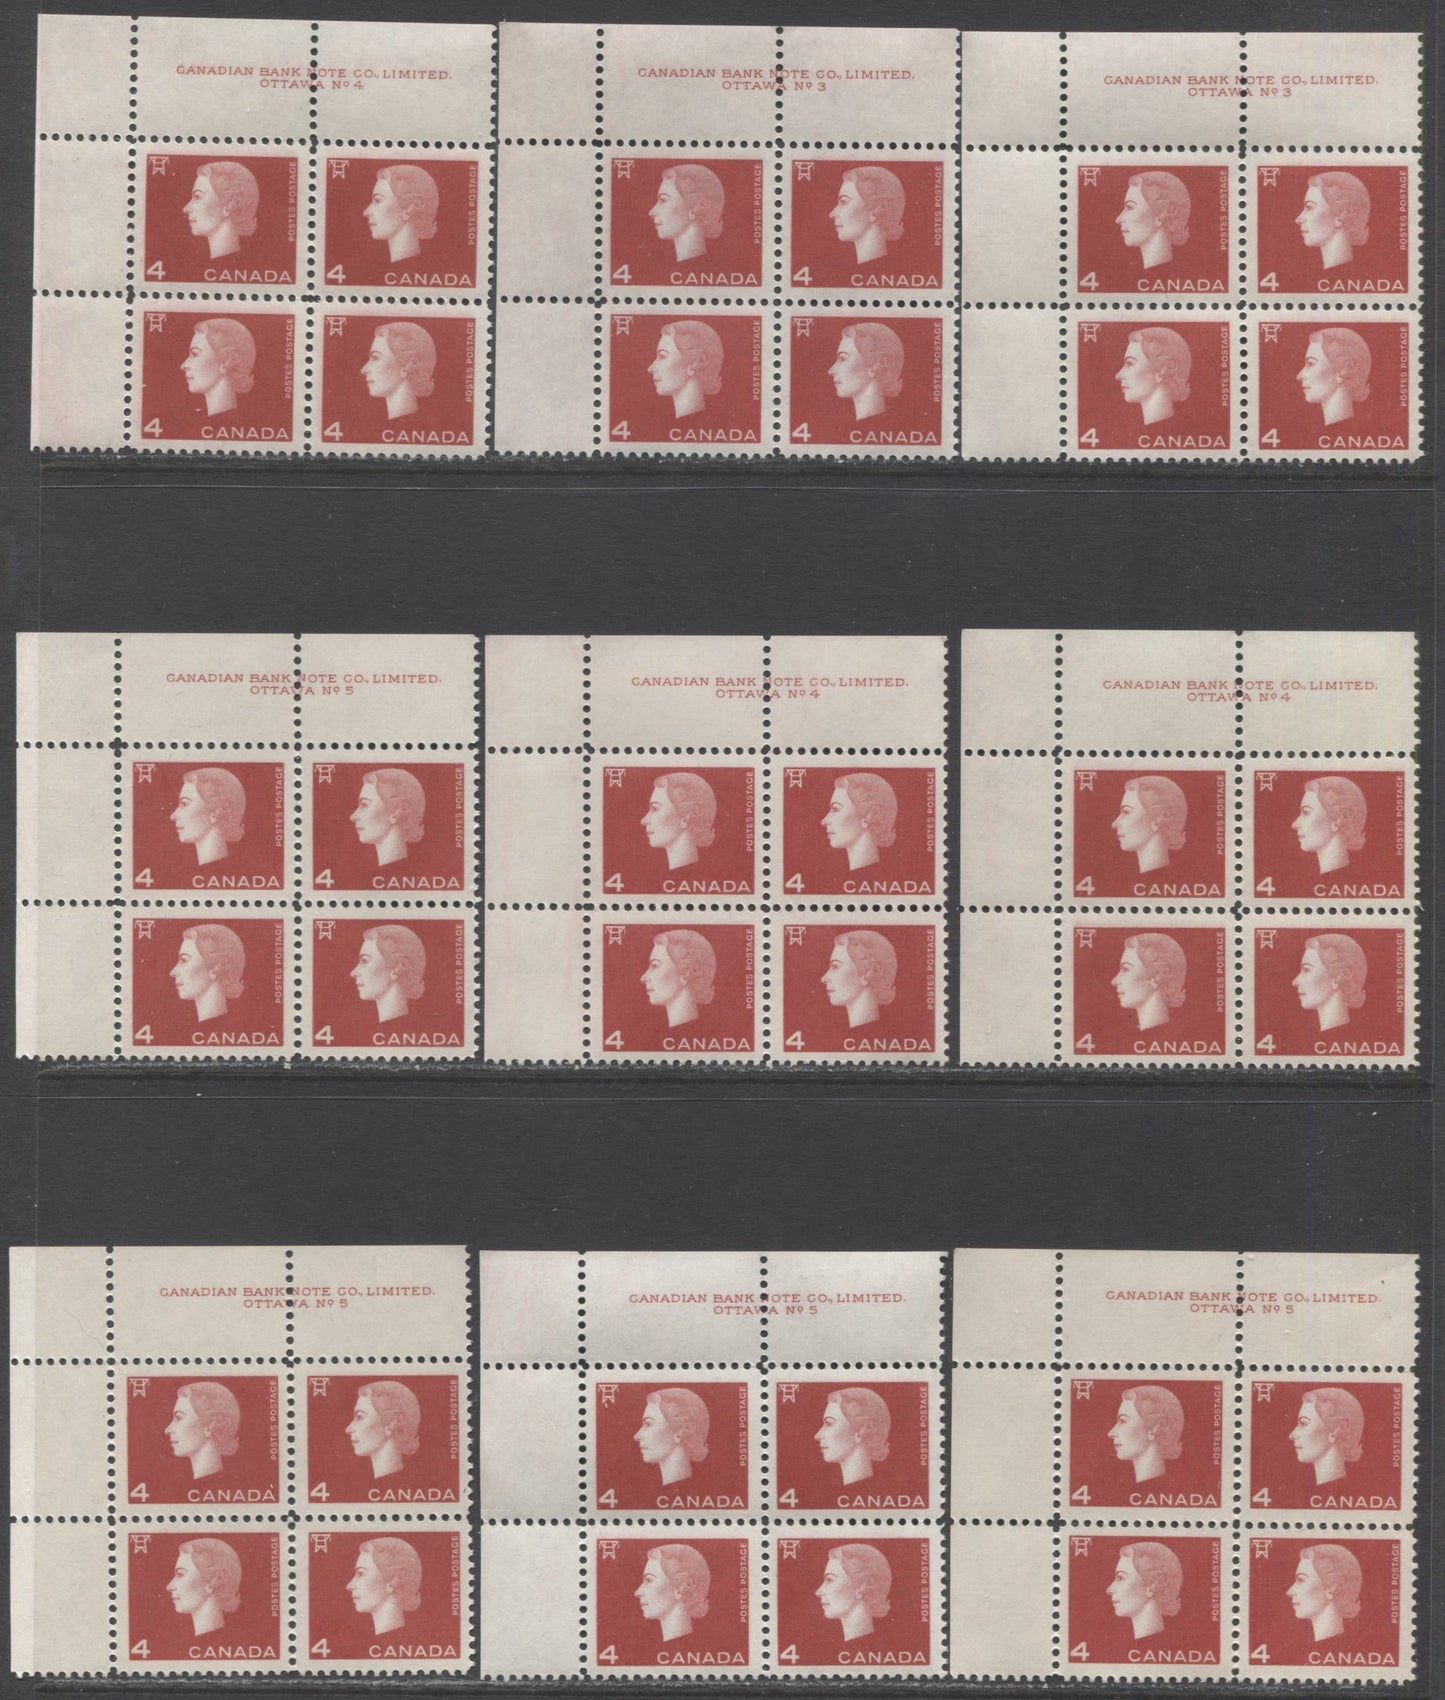 Lot 108 Canada #404 4c Carmine Electricity, 1962-1963 Cameo Issue, 16 VFNH UL Plates 1-5 Blocks Of 4 With Shade & Gum Varieties